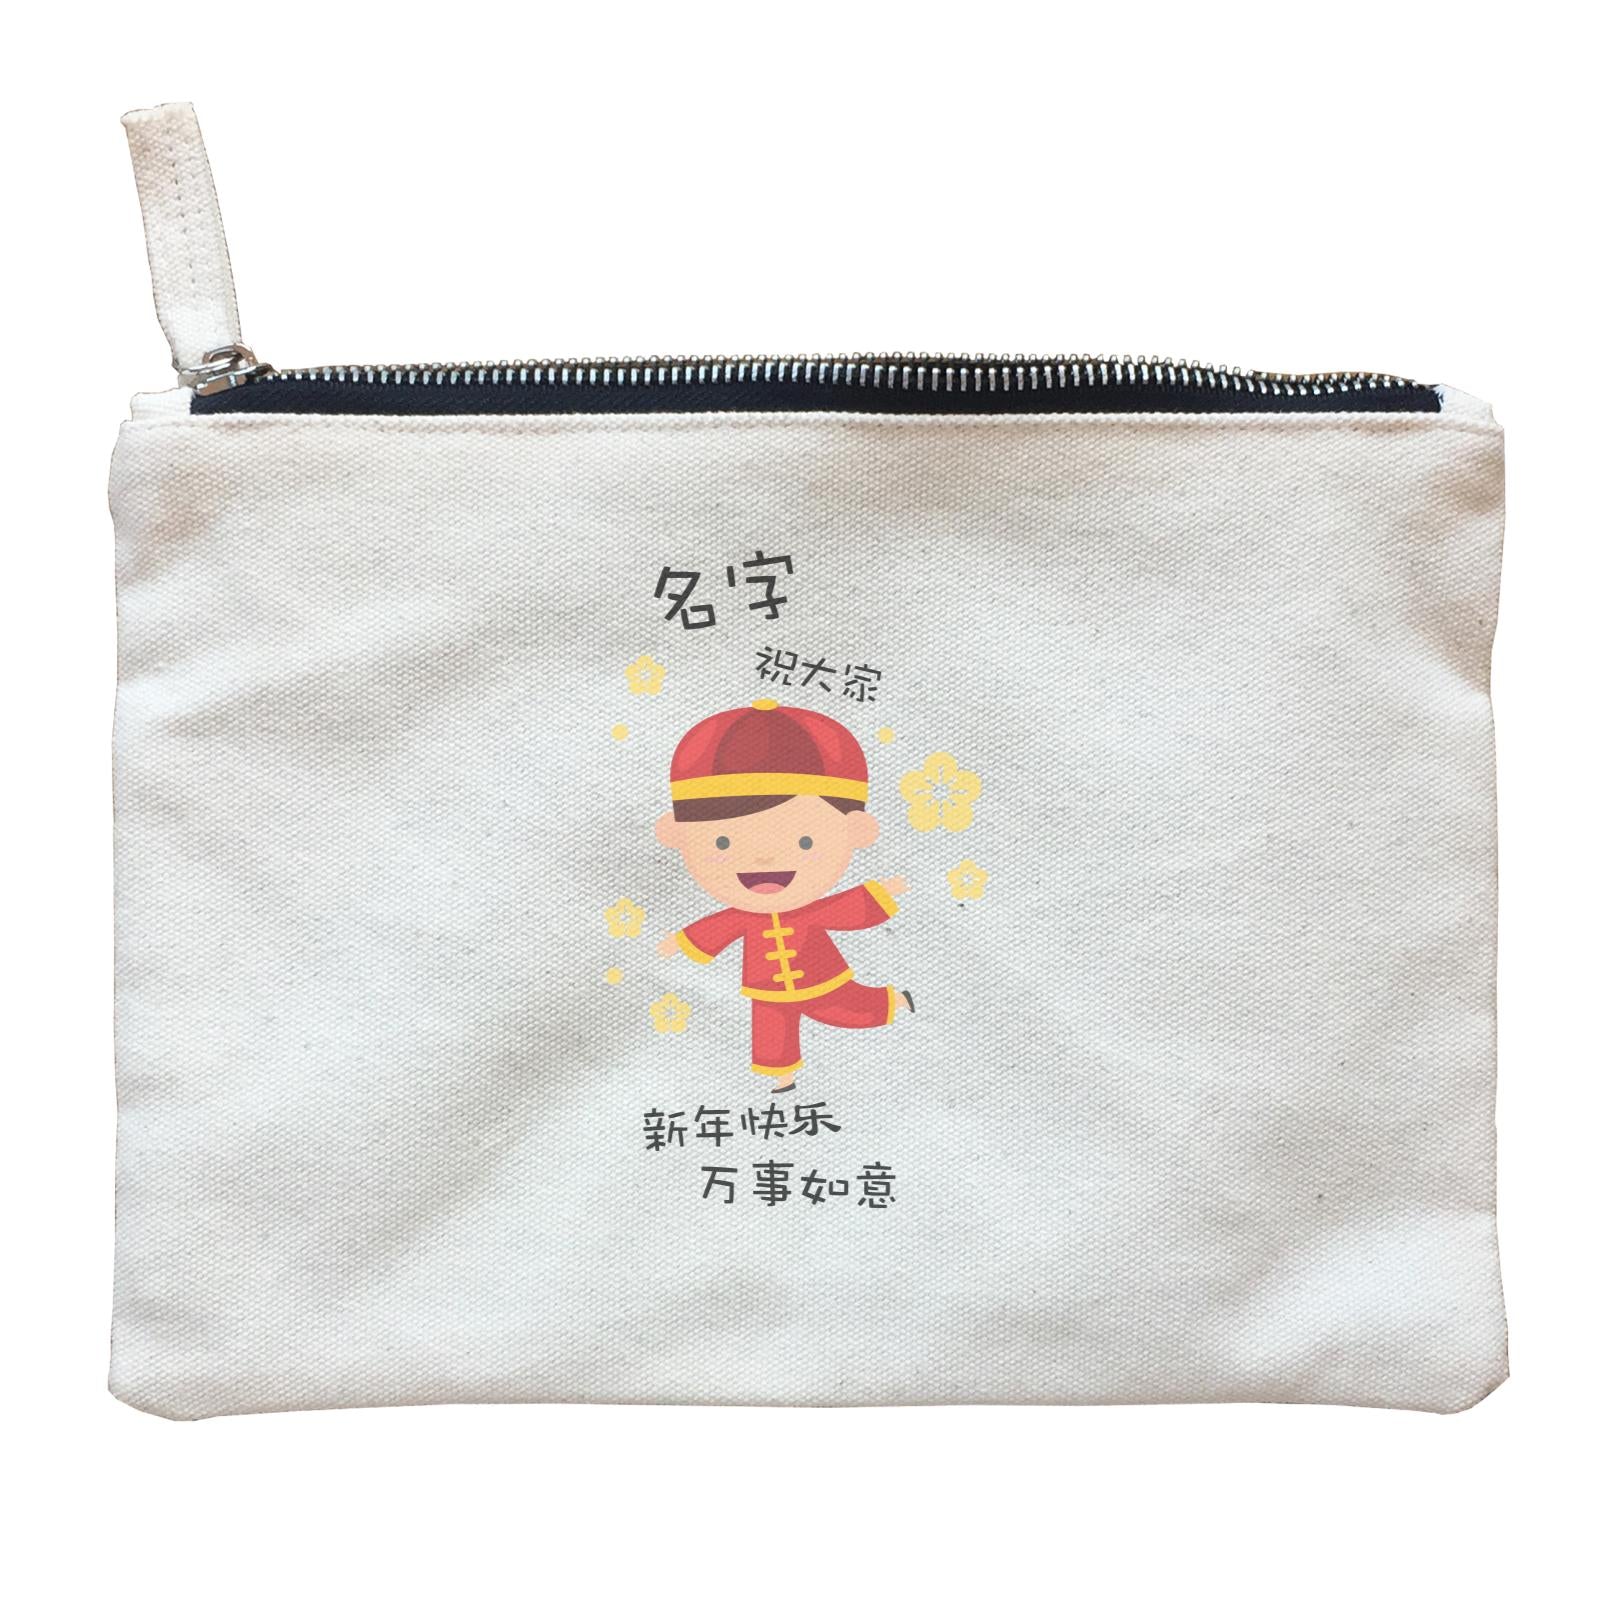 Chinese New Year Cute Boy 2 Wishes Everyone Happy CNY Zipper Pouch